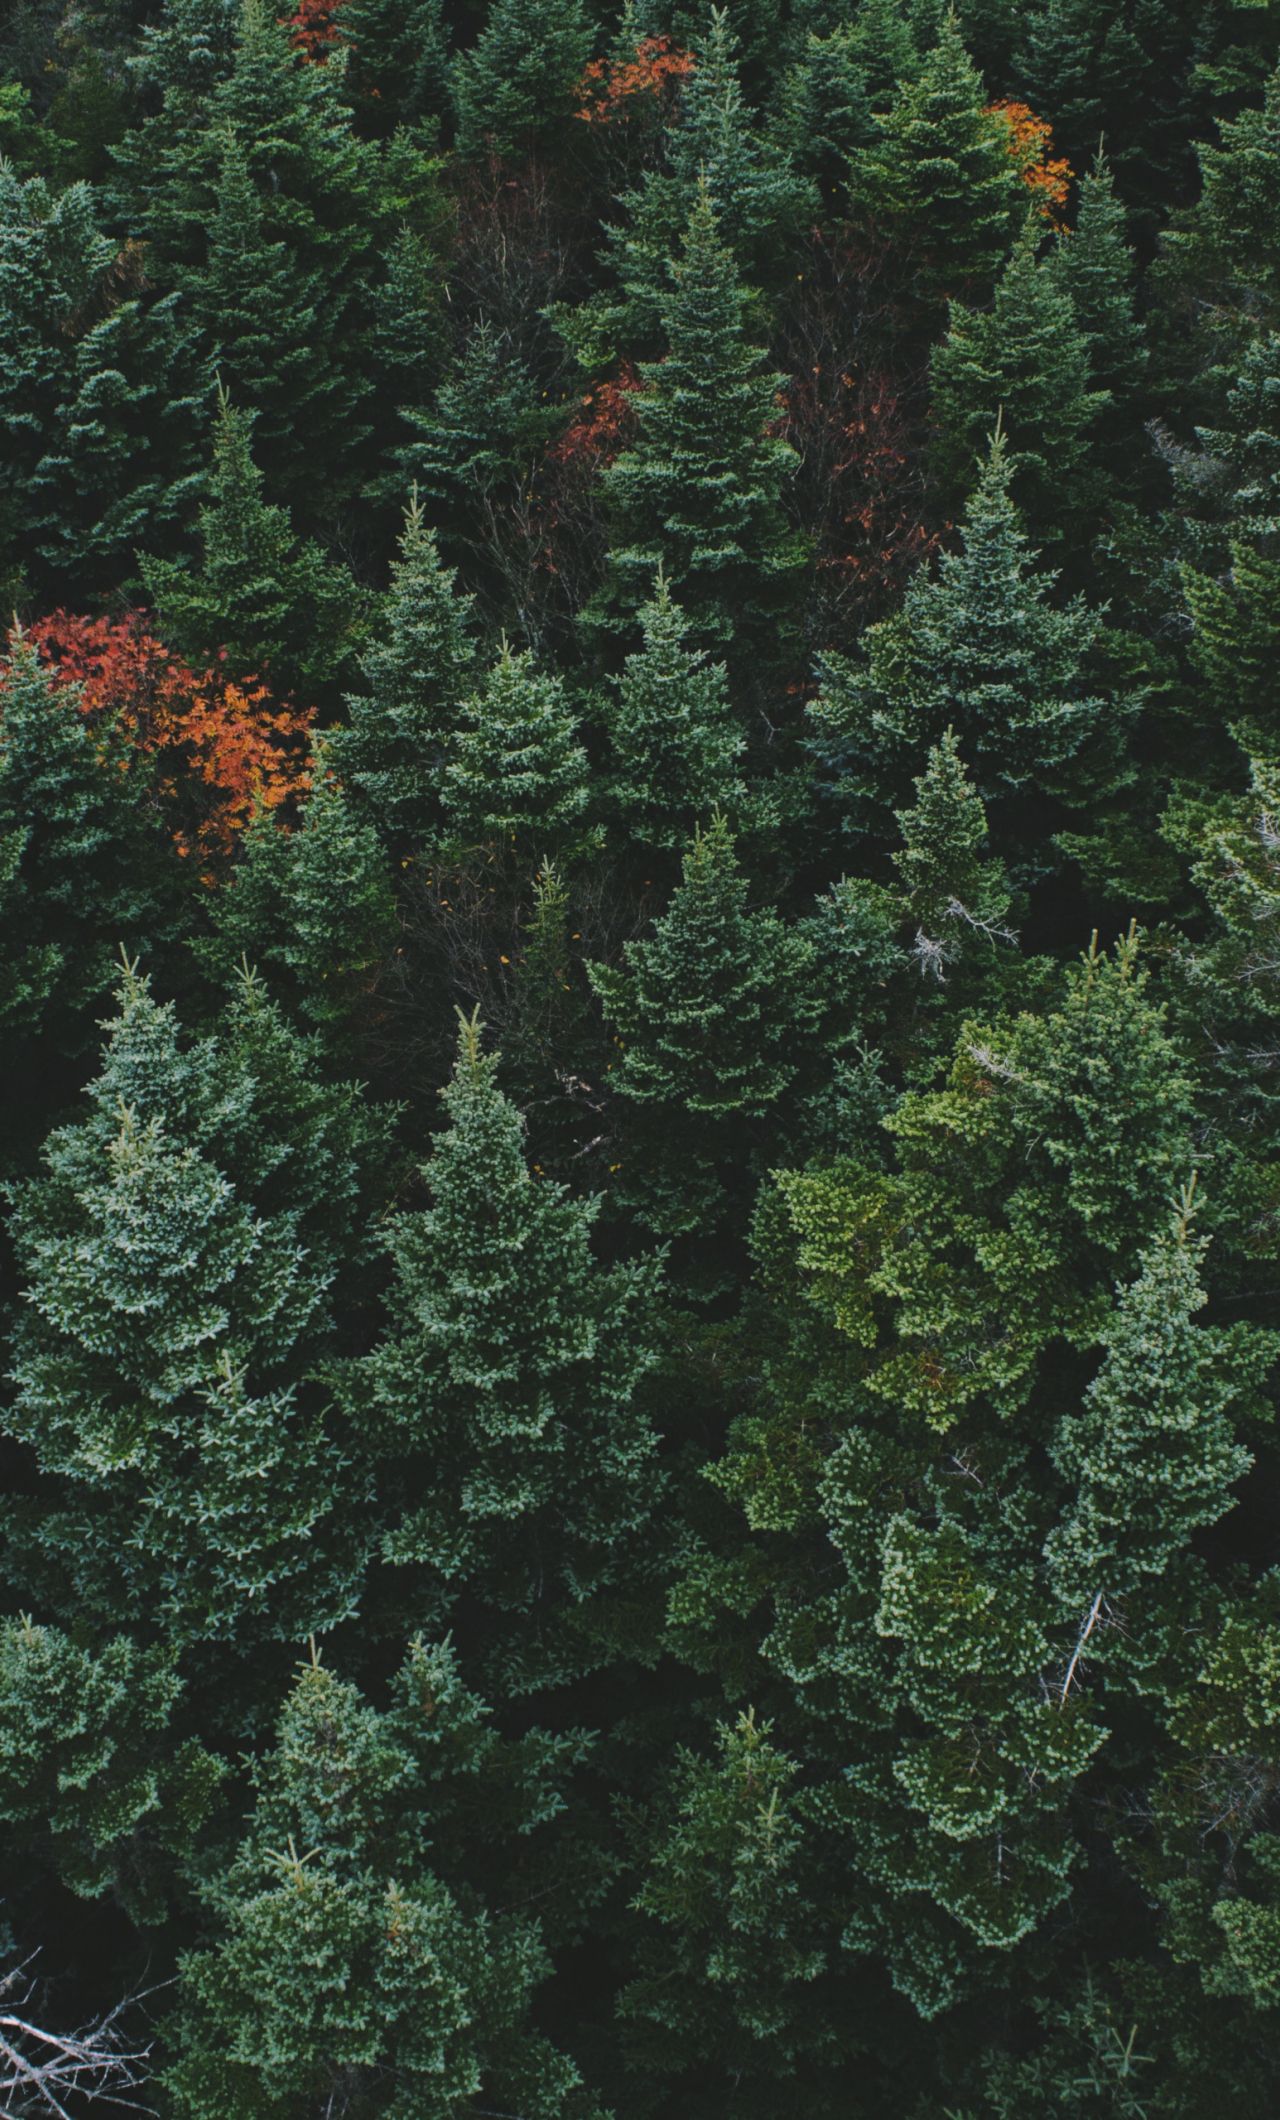 Download 1280x2120 wallpaper drone shot, forest, green trees, nature, iphone 6 plus, 1280x2120 HD image, background, 15689